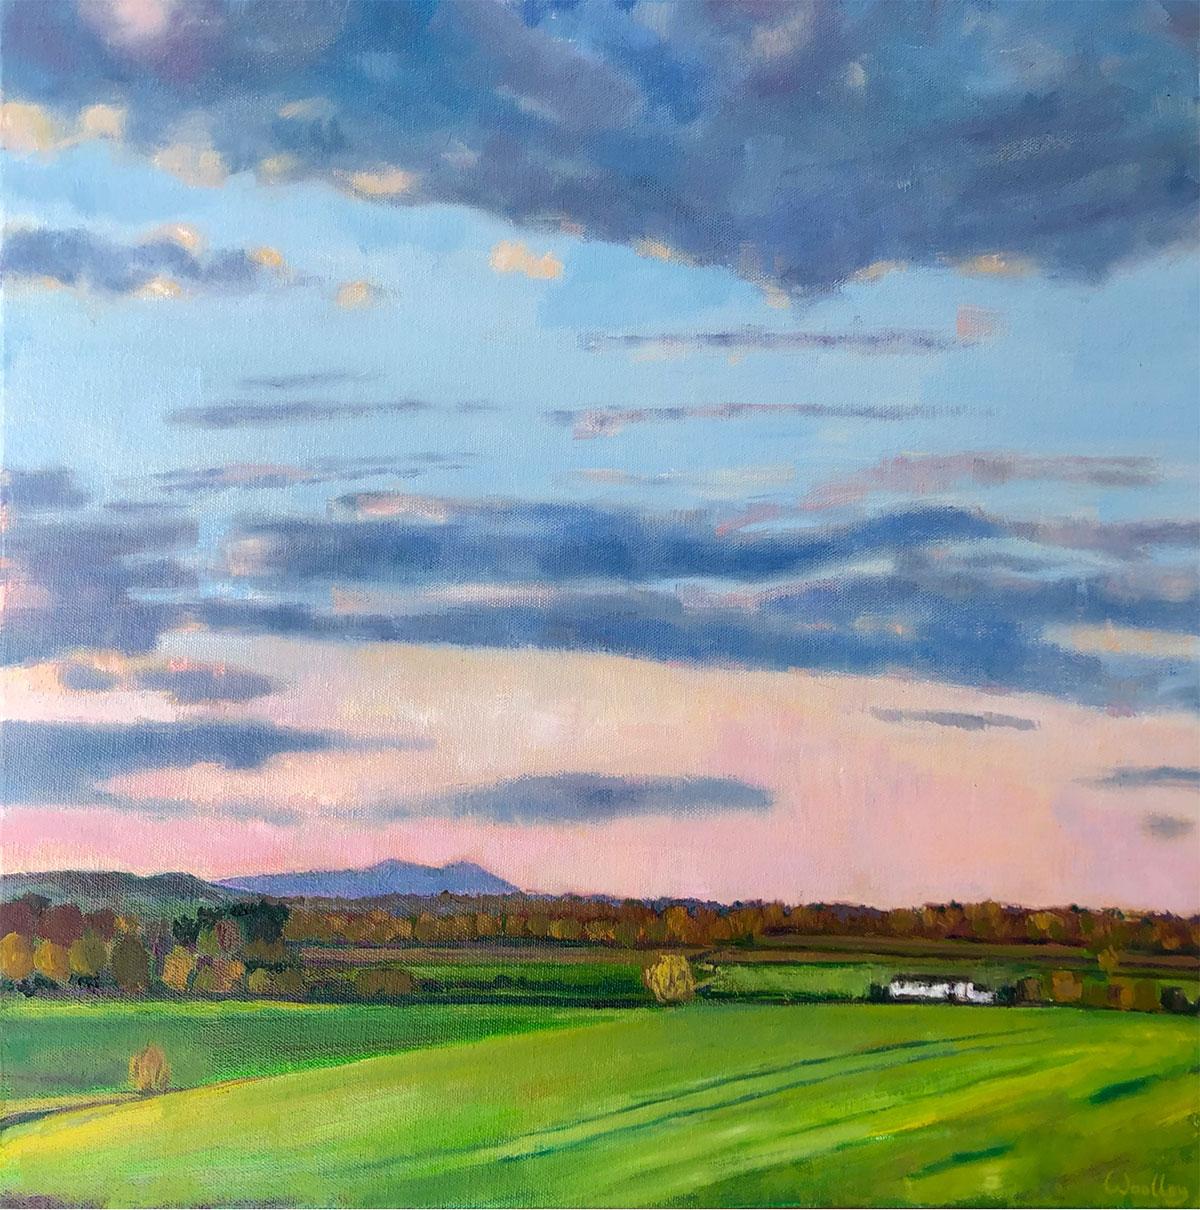 Eleanor Woolley  Landscape Painting - Malvern Sunset by Eleanor Woolley, Contemporary art, Original painting